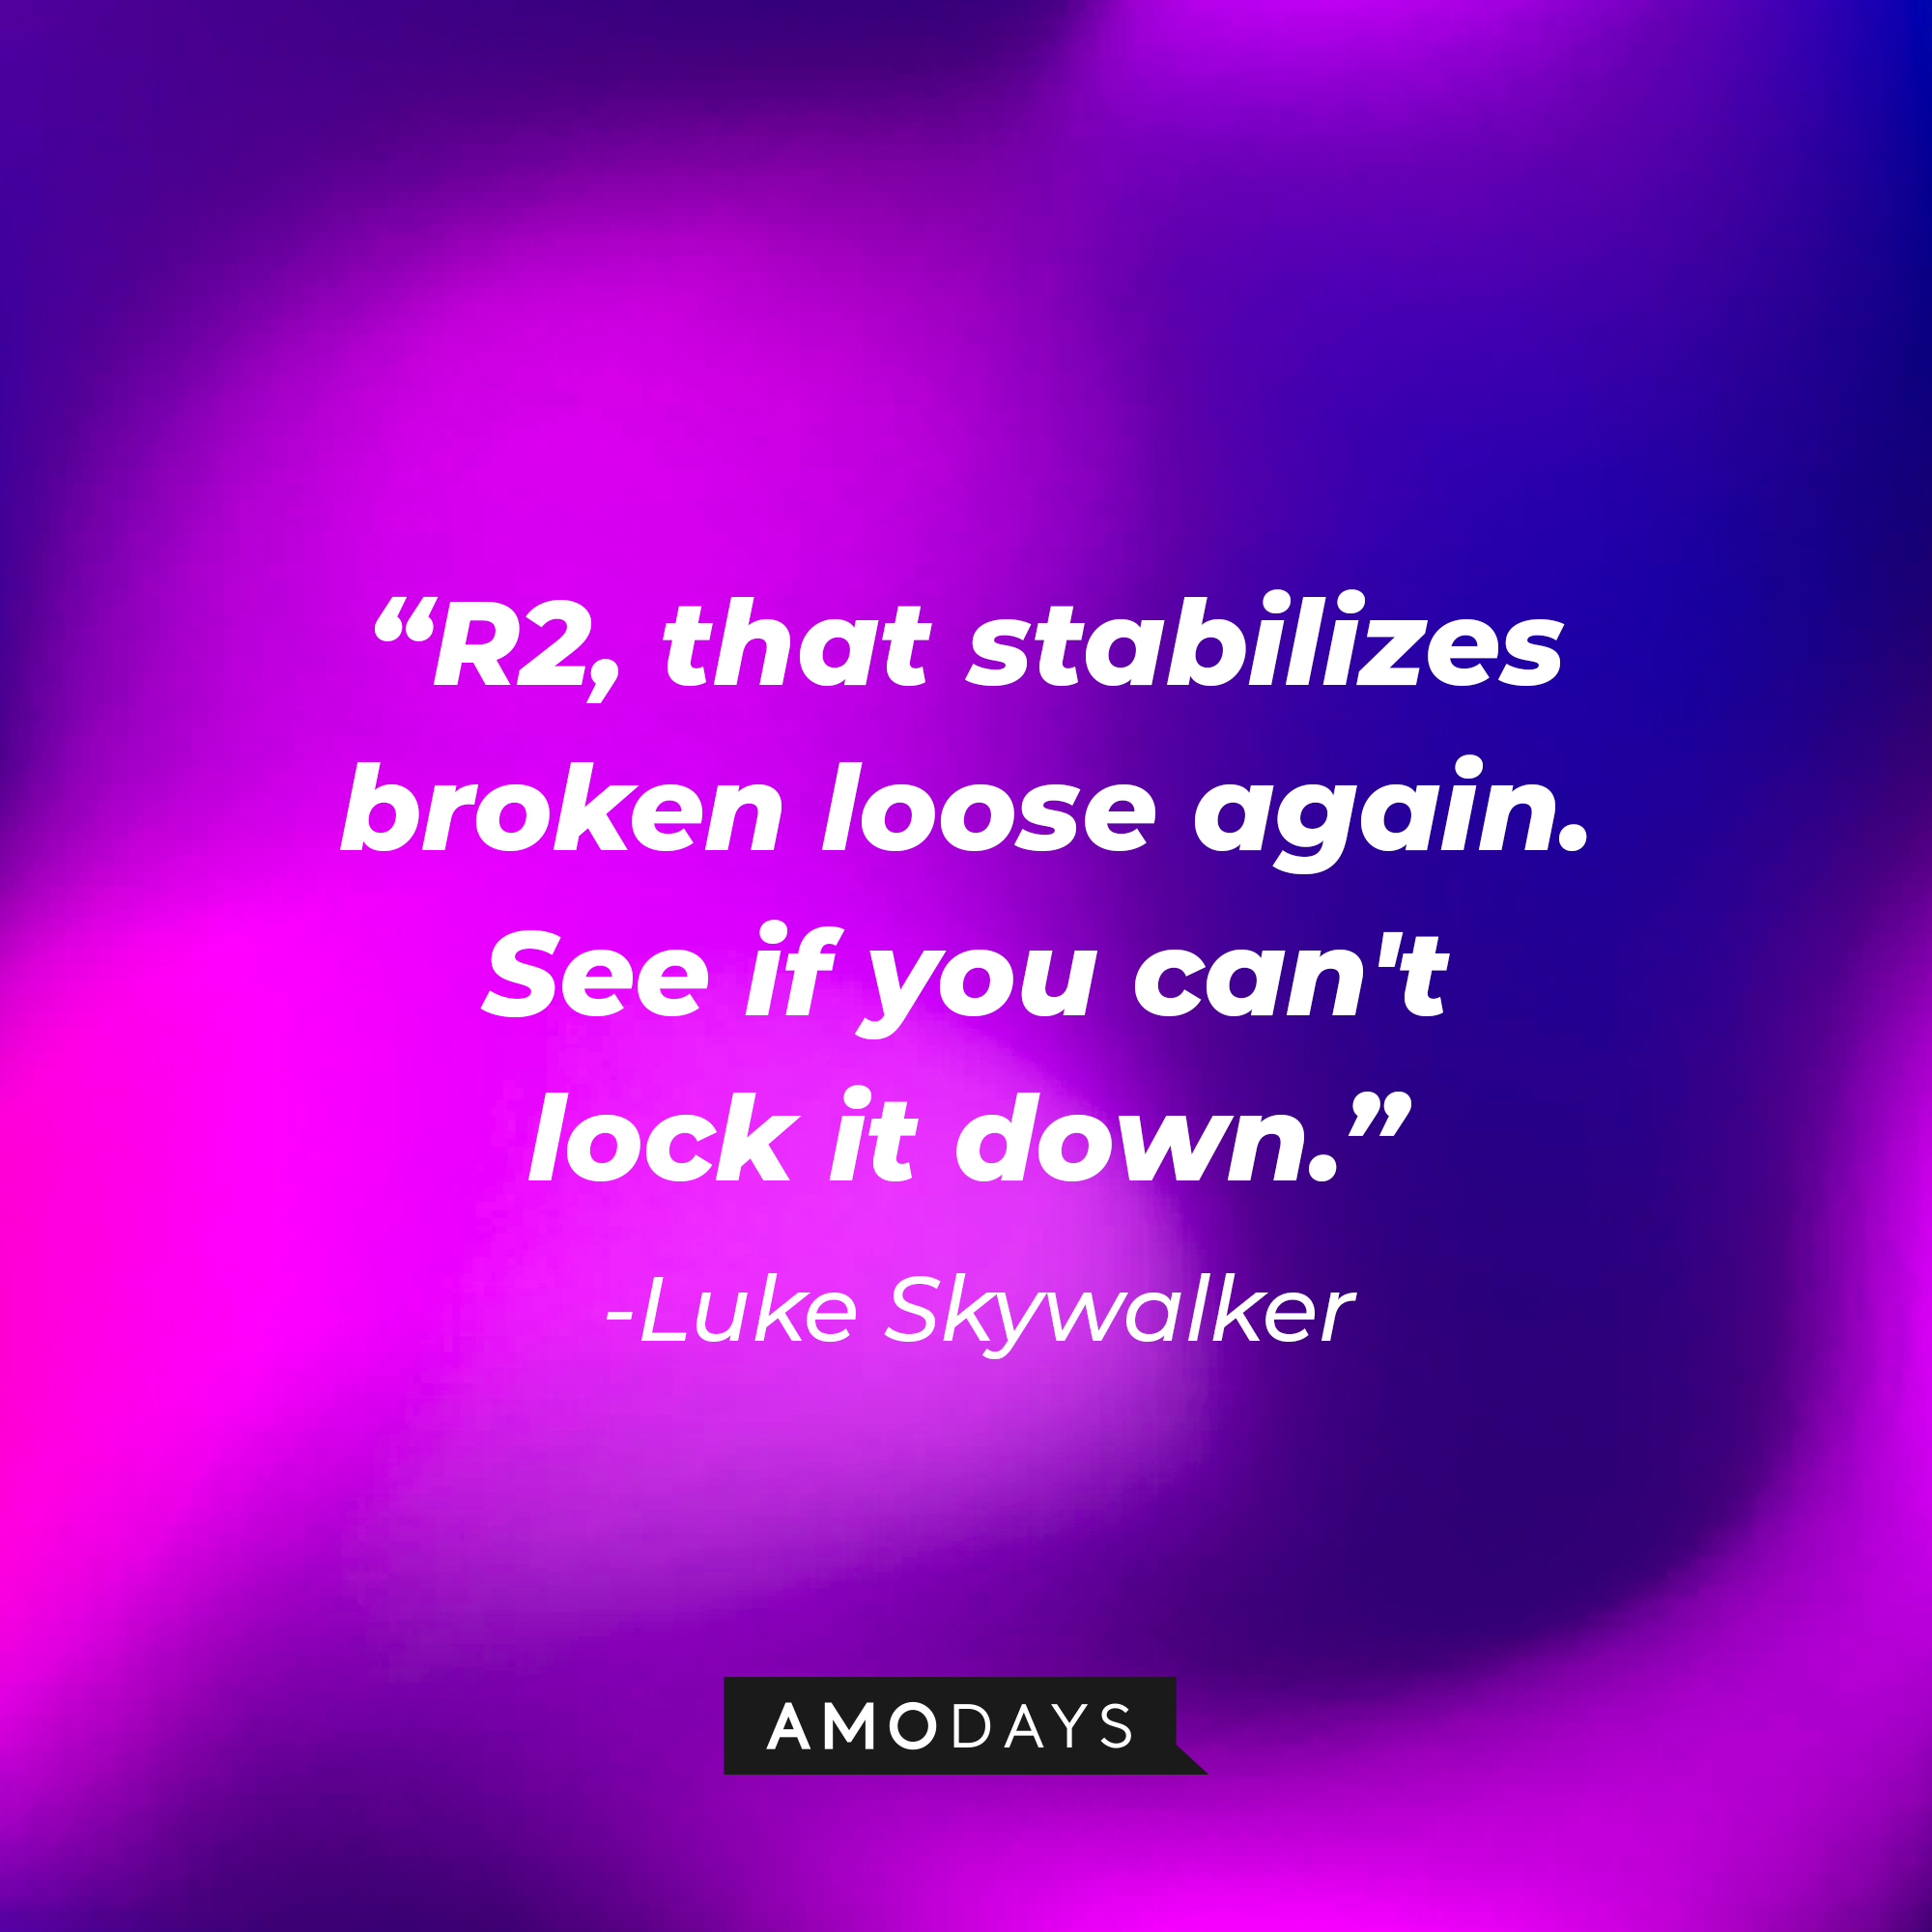 Luke Skywalker's quote: "R2, that stabilizes broken loose again. See if you can't lock it down." | Source: AmoDays